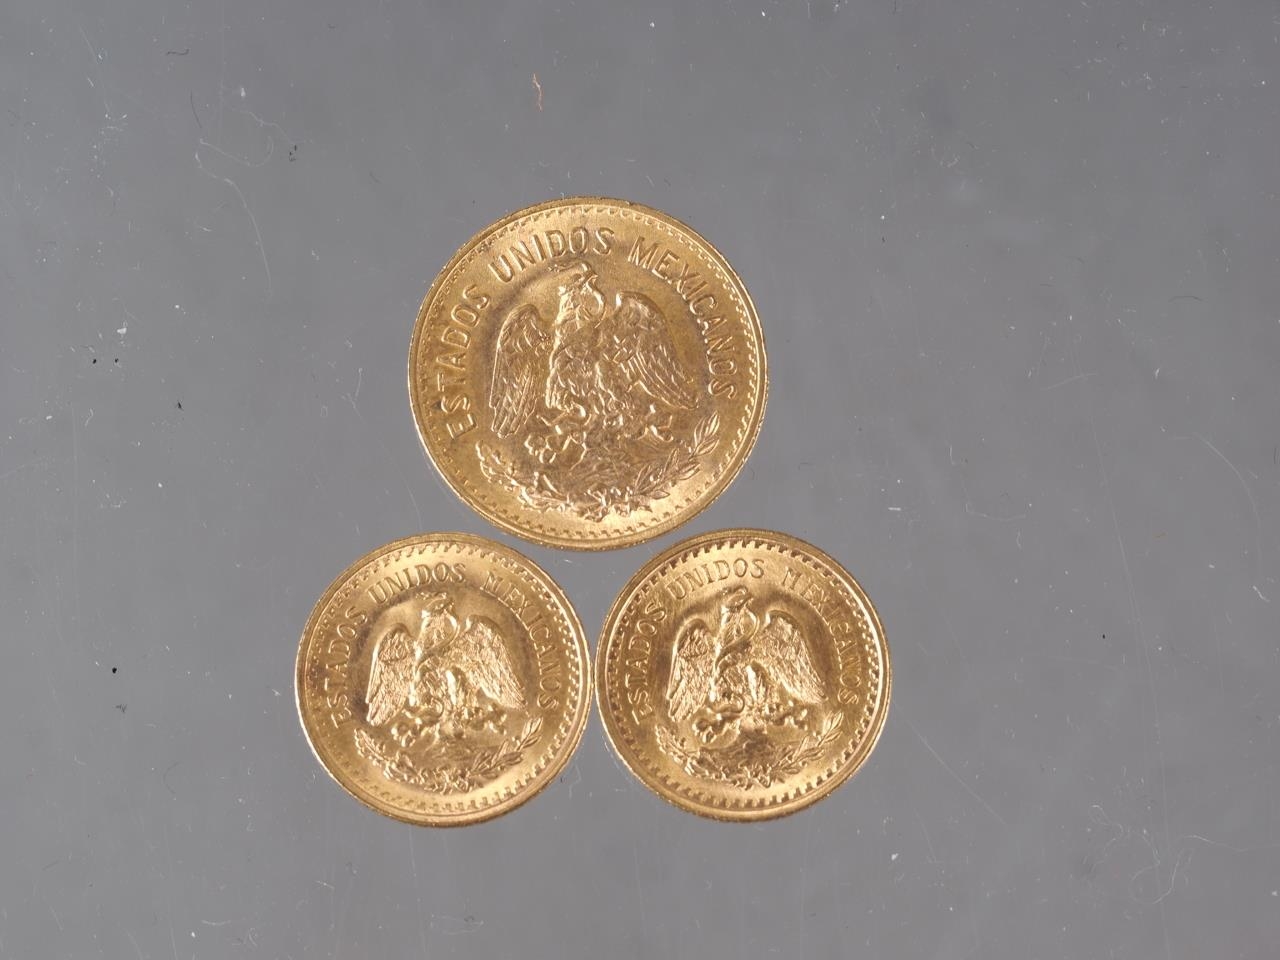 A Mexican 5 pesos gold coin and two Mexican 2 1/2 pesos gold coins, 8.3g gross - Image 2 of 2